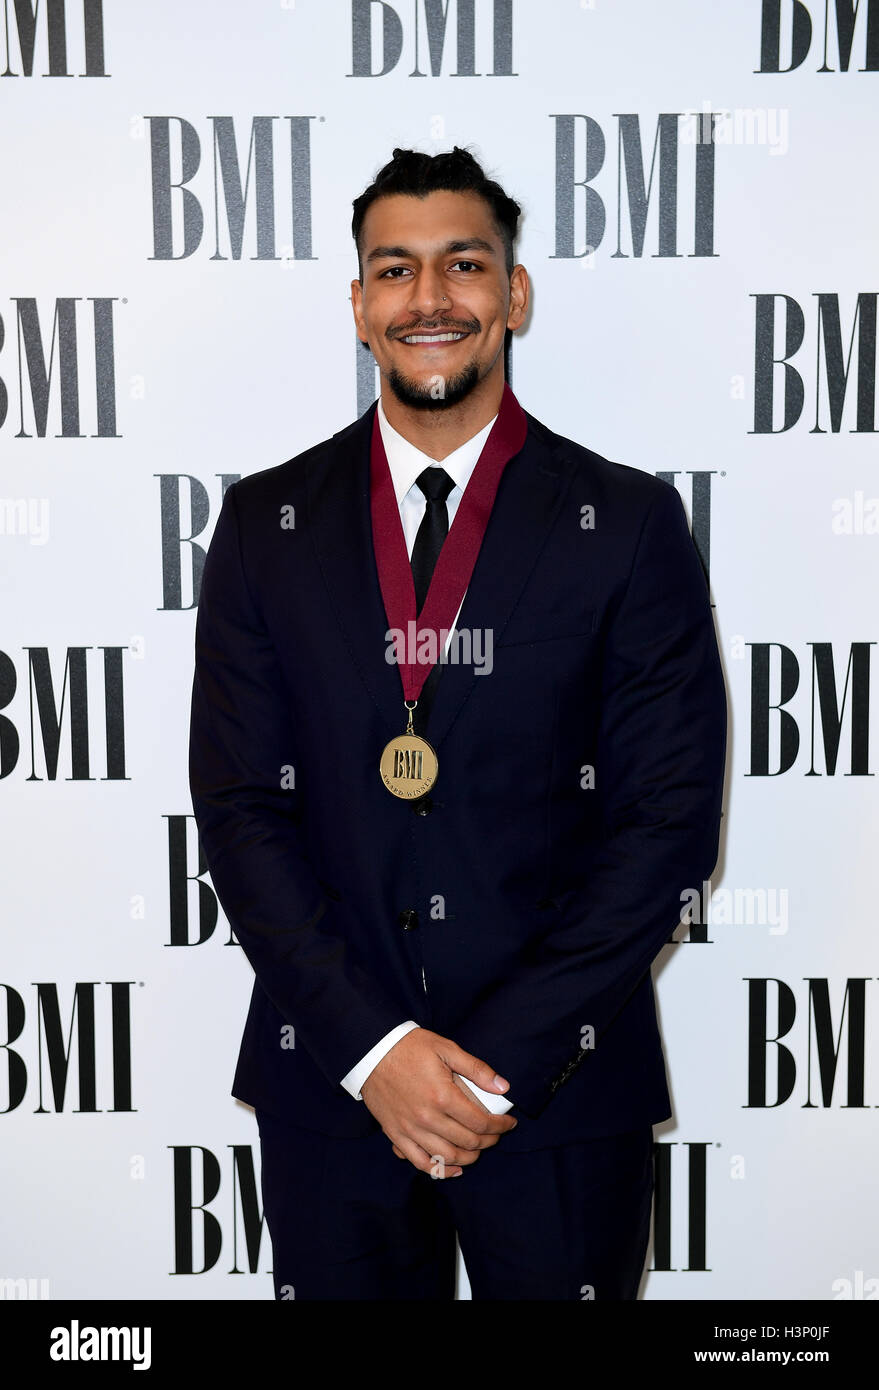 Jasbir Sehra attending the BMI London Awards at the Dorchester Hotel, London. PRESS ASSOCIATION Photo. Picture date: Monday 10th October, 2016. Photo credit should read: Ian West/PA Wire. Stock Photo